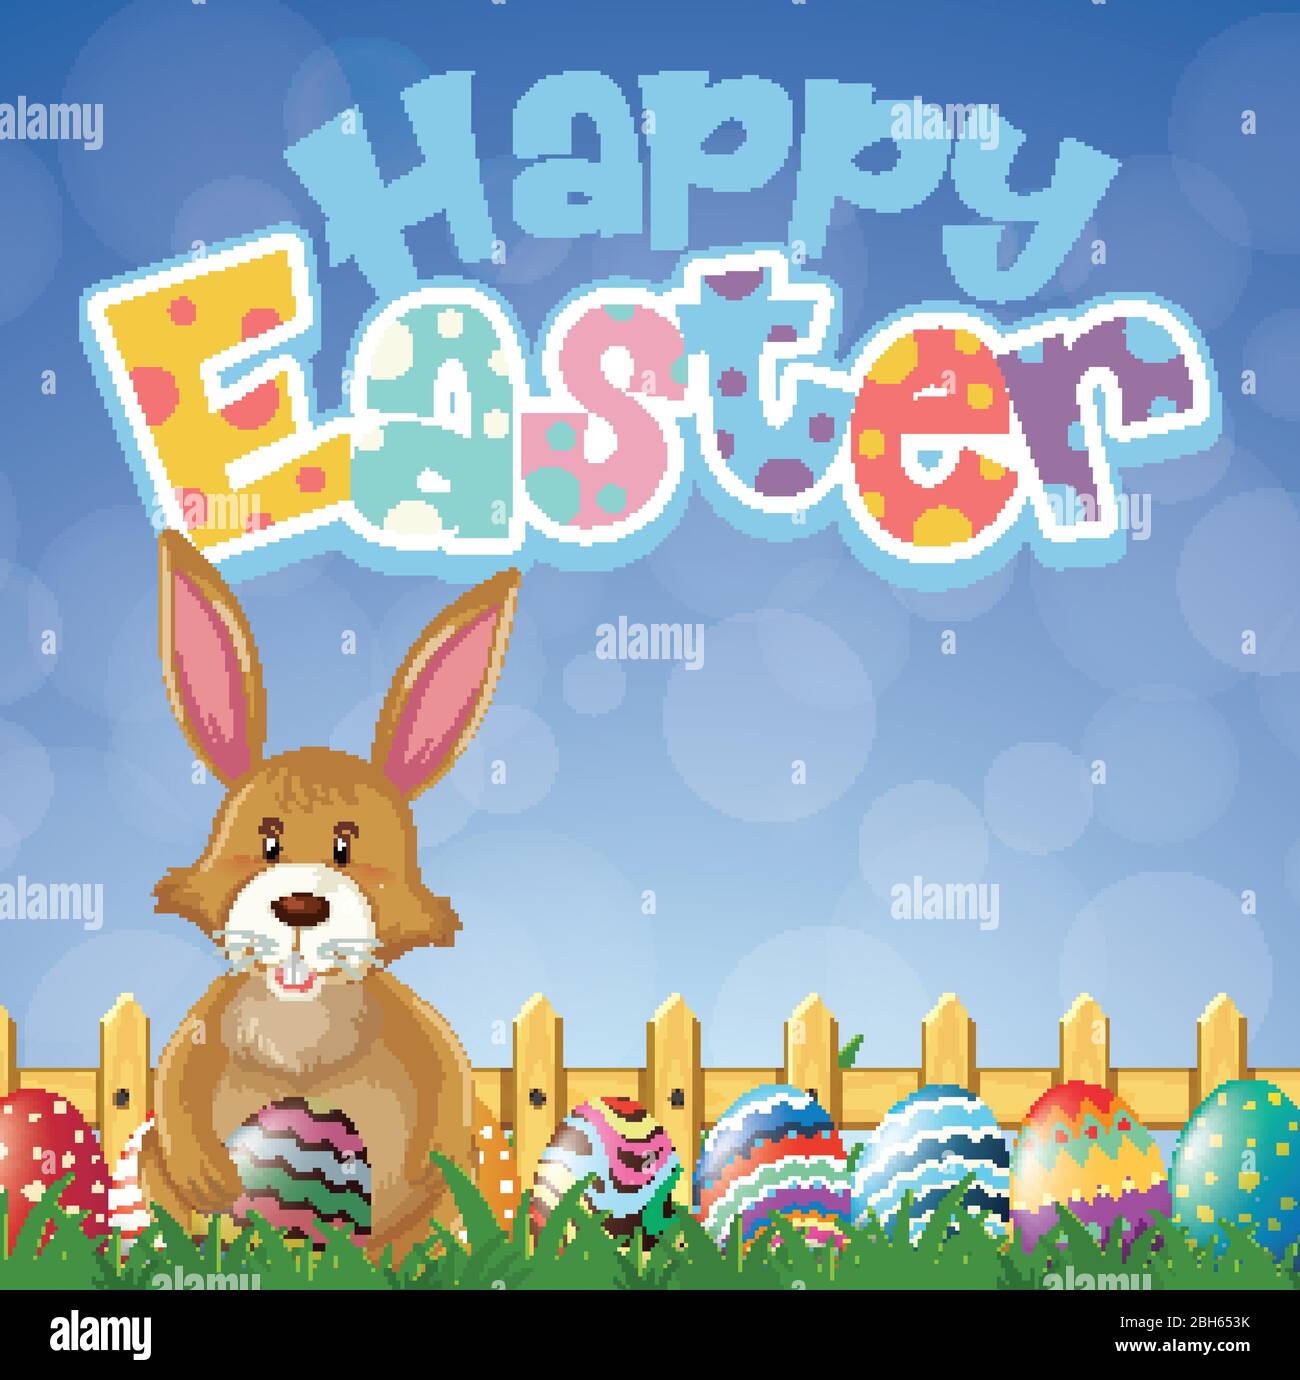 Happy Easter font design with bunny and painted eggs in garden illustration Stock Vector